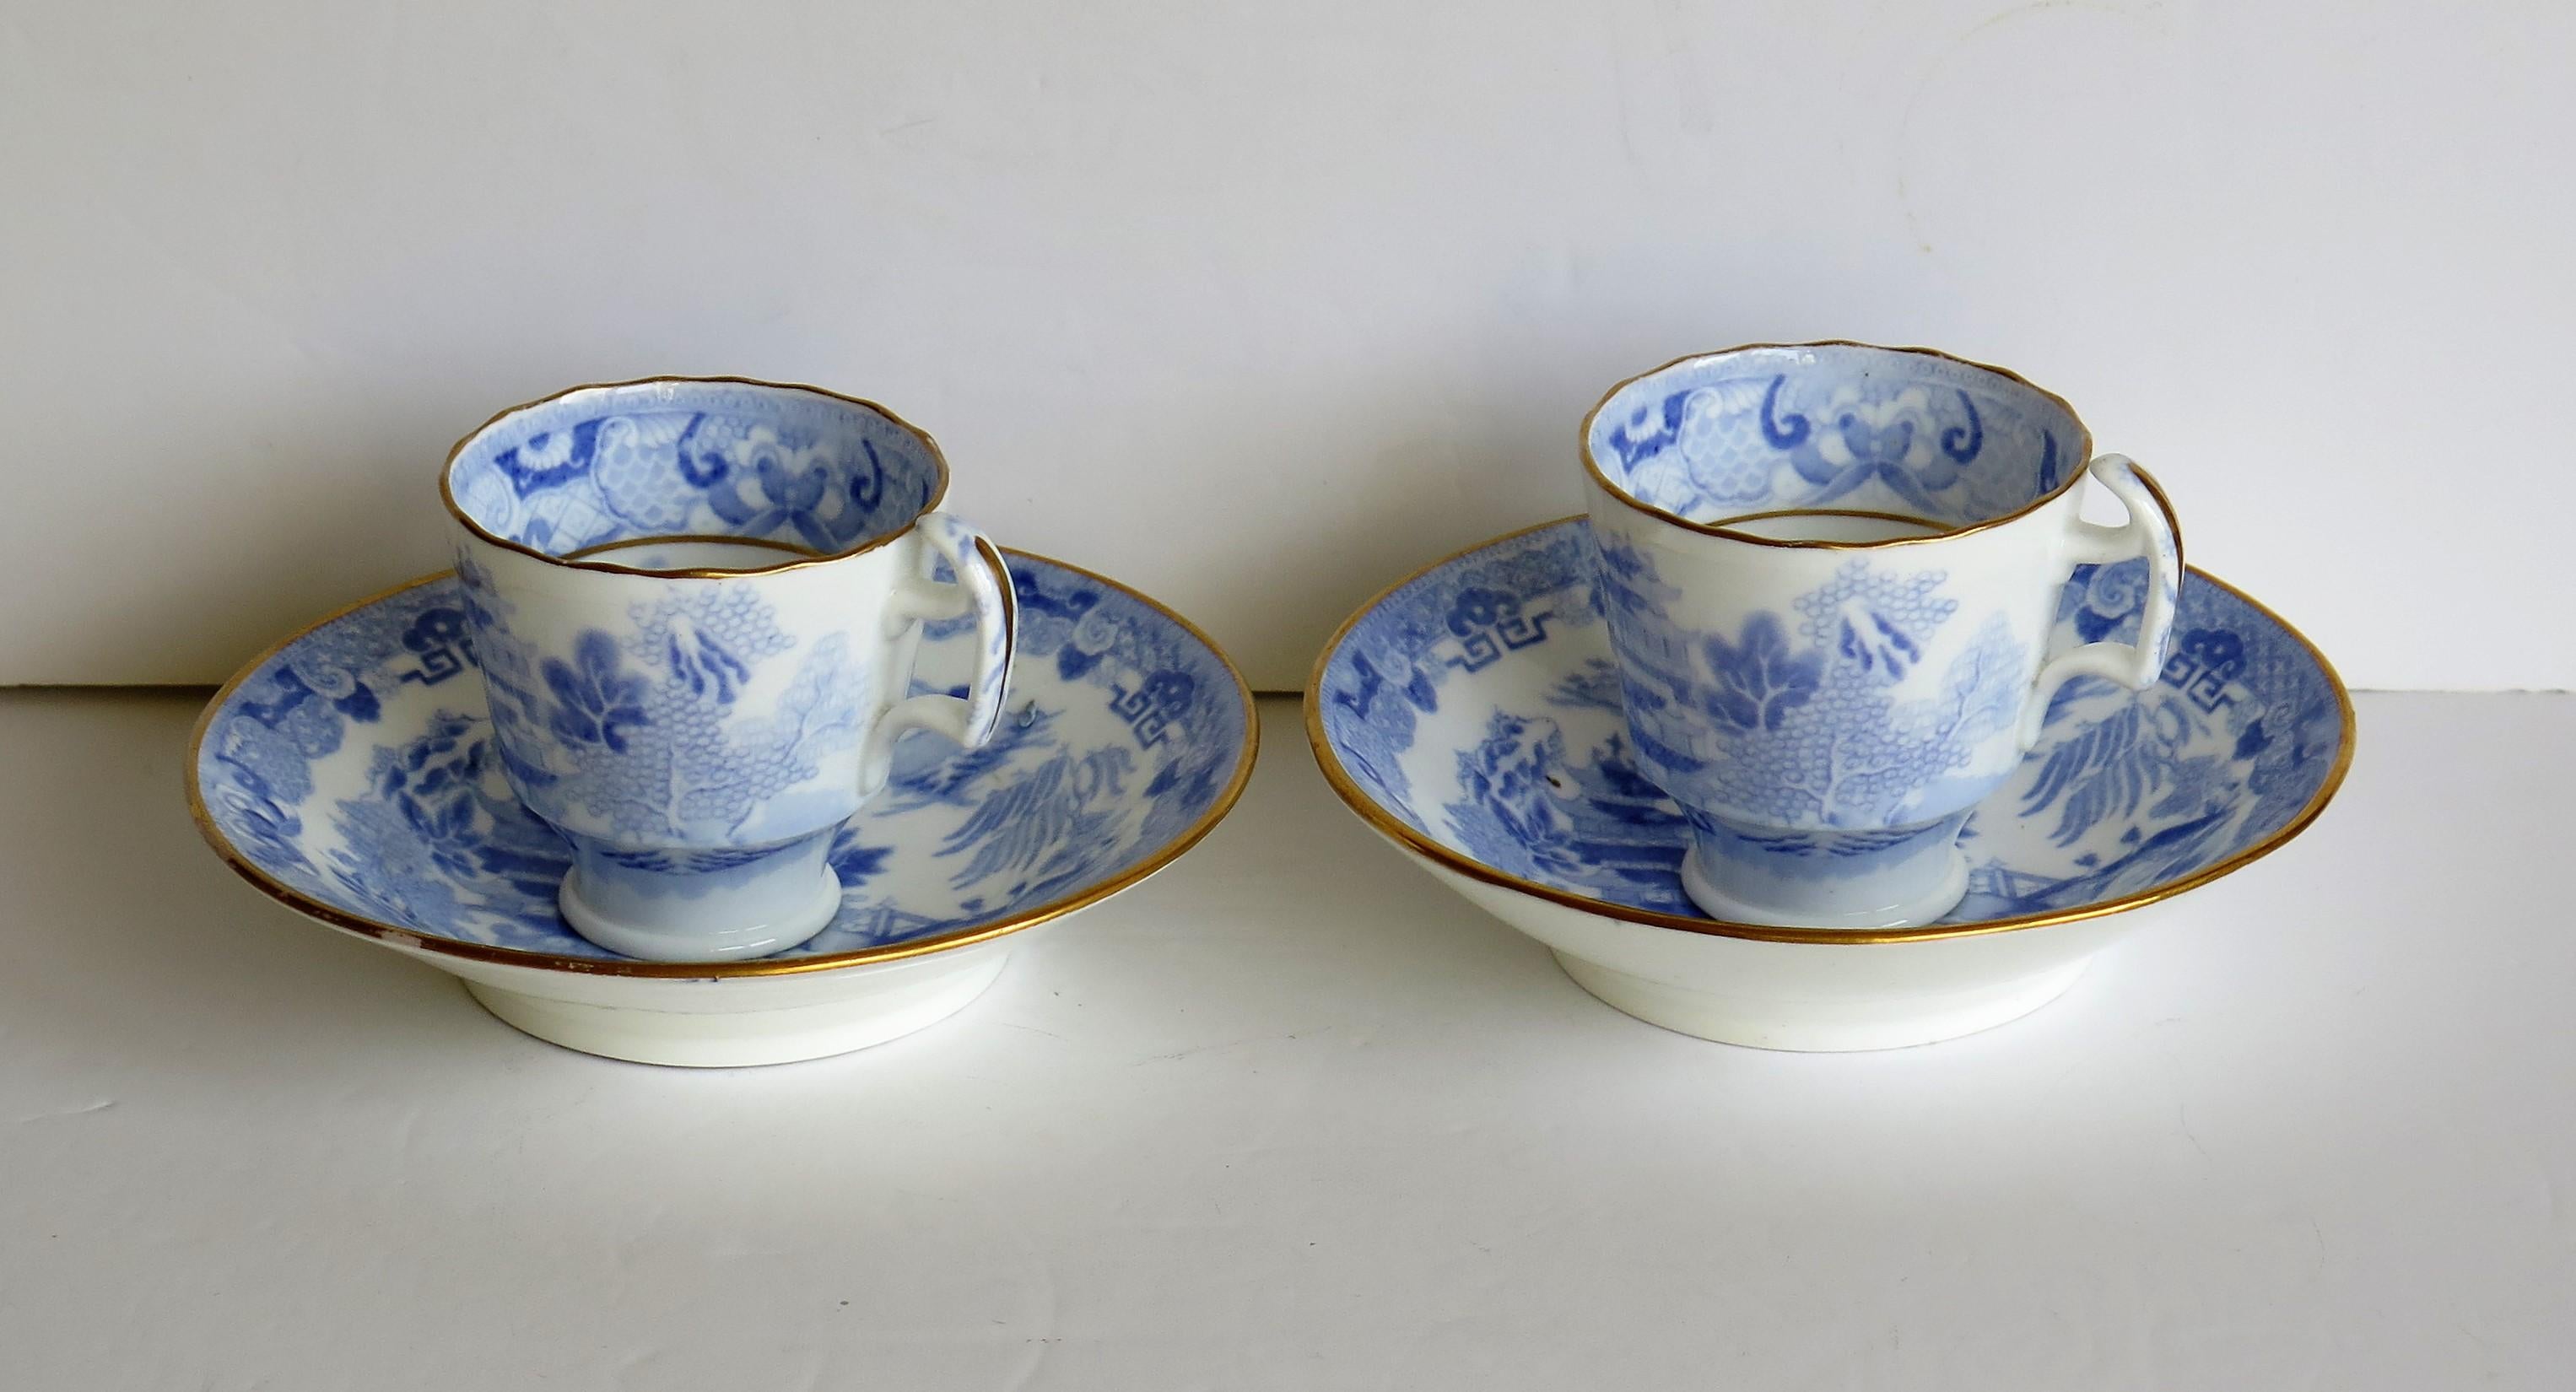 This is a porcelain blue and white, hand gilded pair of coffee cups and saucers made by Miles Mason (Mason's), Staffordshire Potteries, in the early 19th century, circa 1812-1820.

All pieces are well potted with the cups having the 